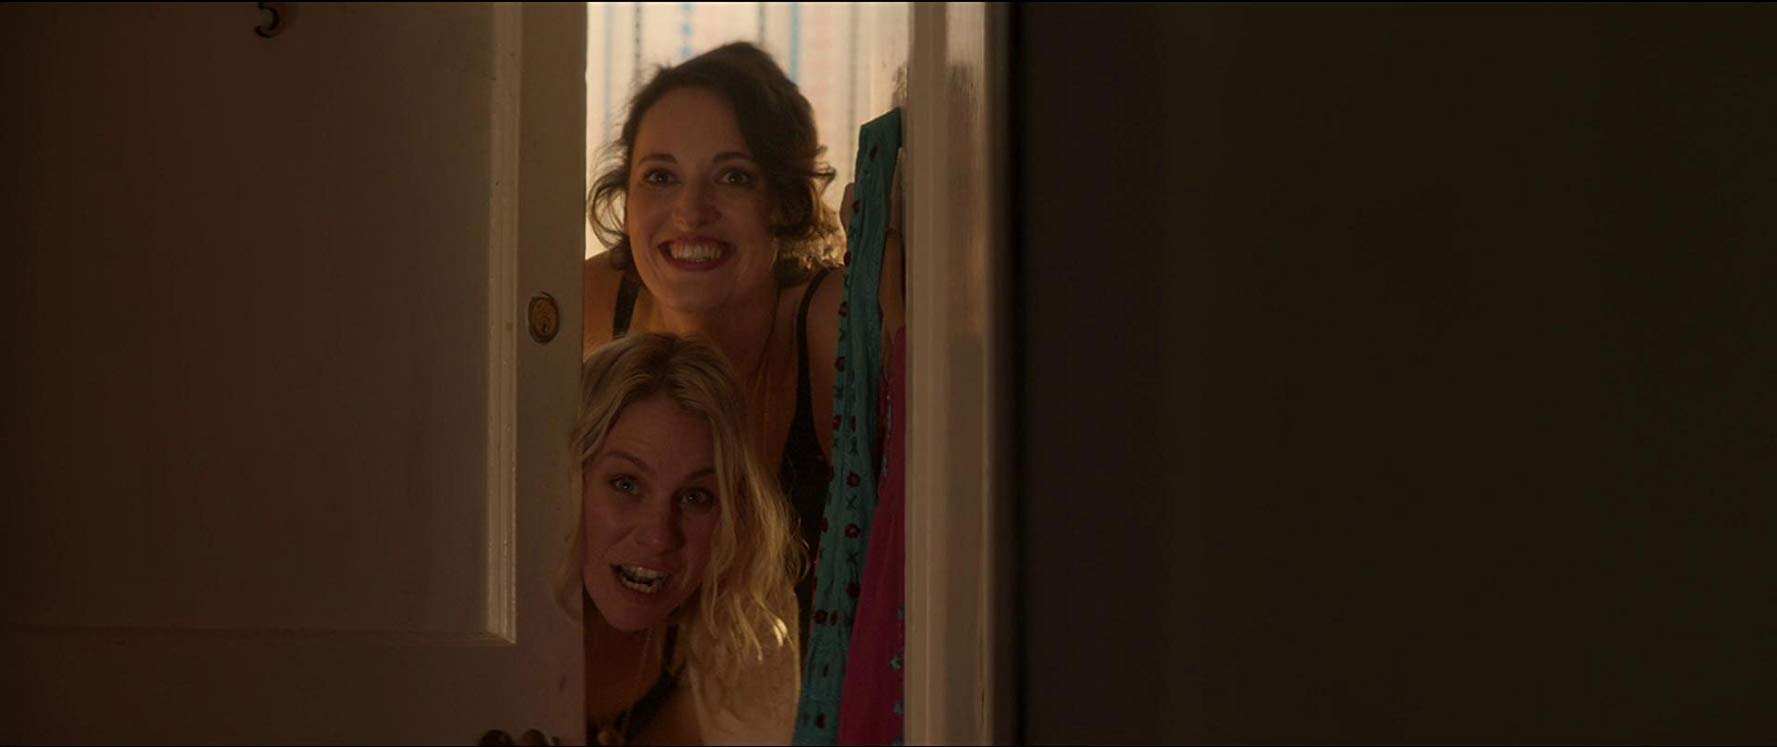 The image of two women smiling from the TV series, Fleabag